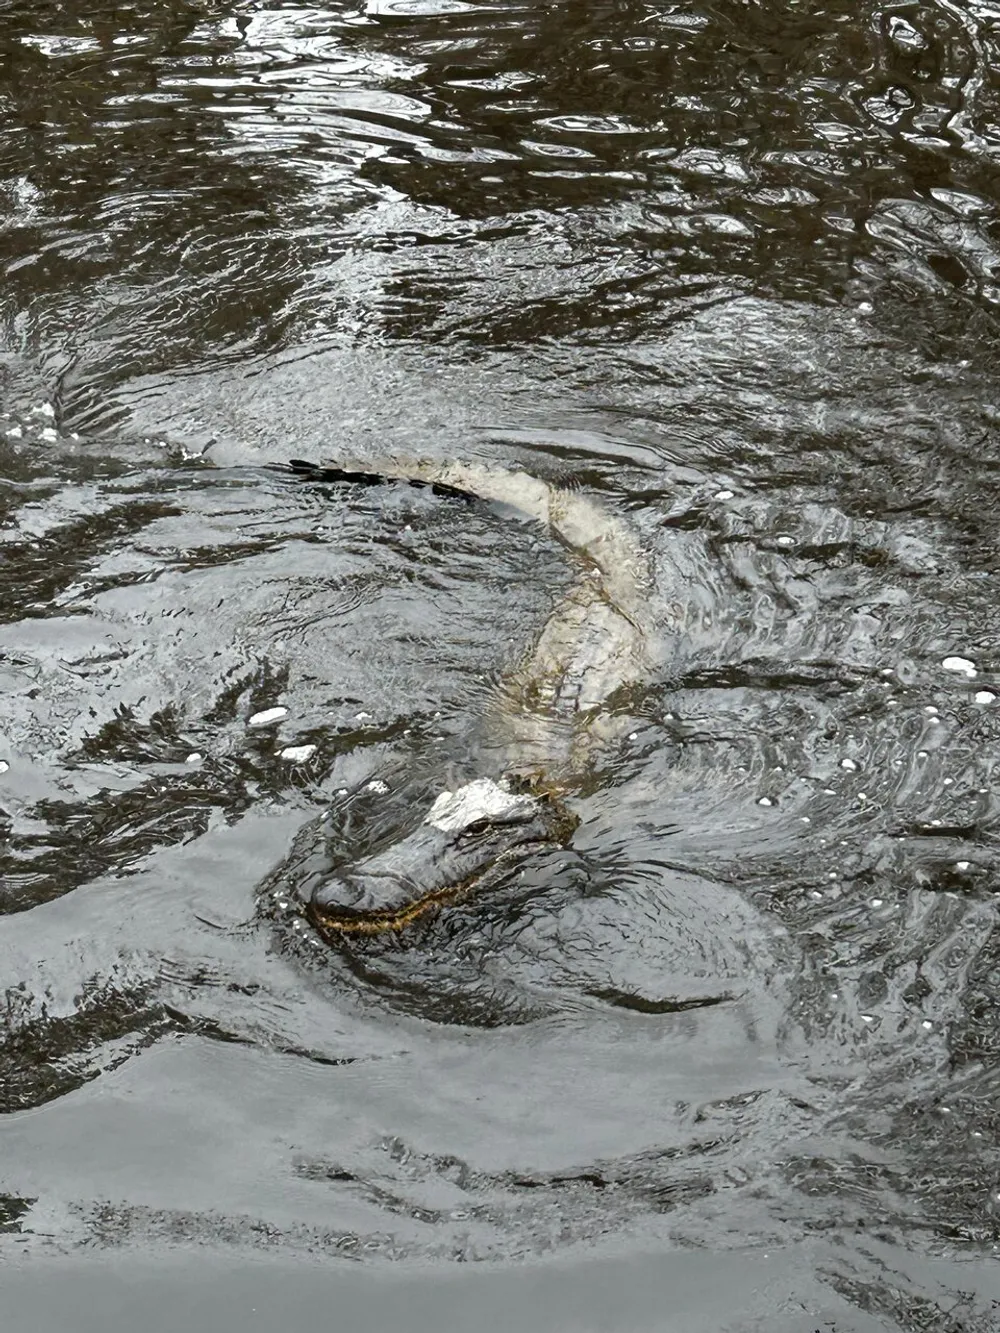 An alligator is partially submerged in water with only its head and upper back visible above the surface creating ripples around it